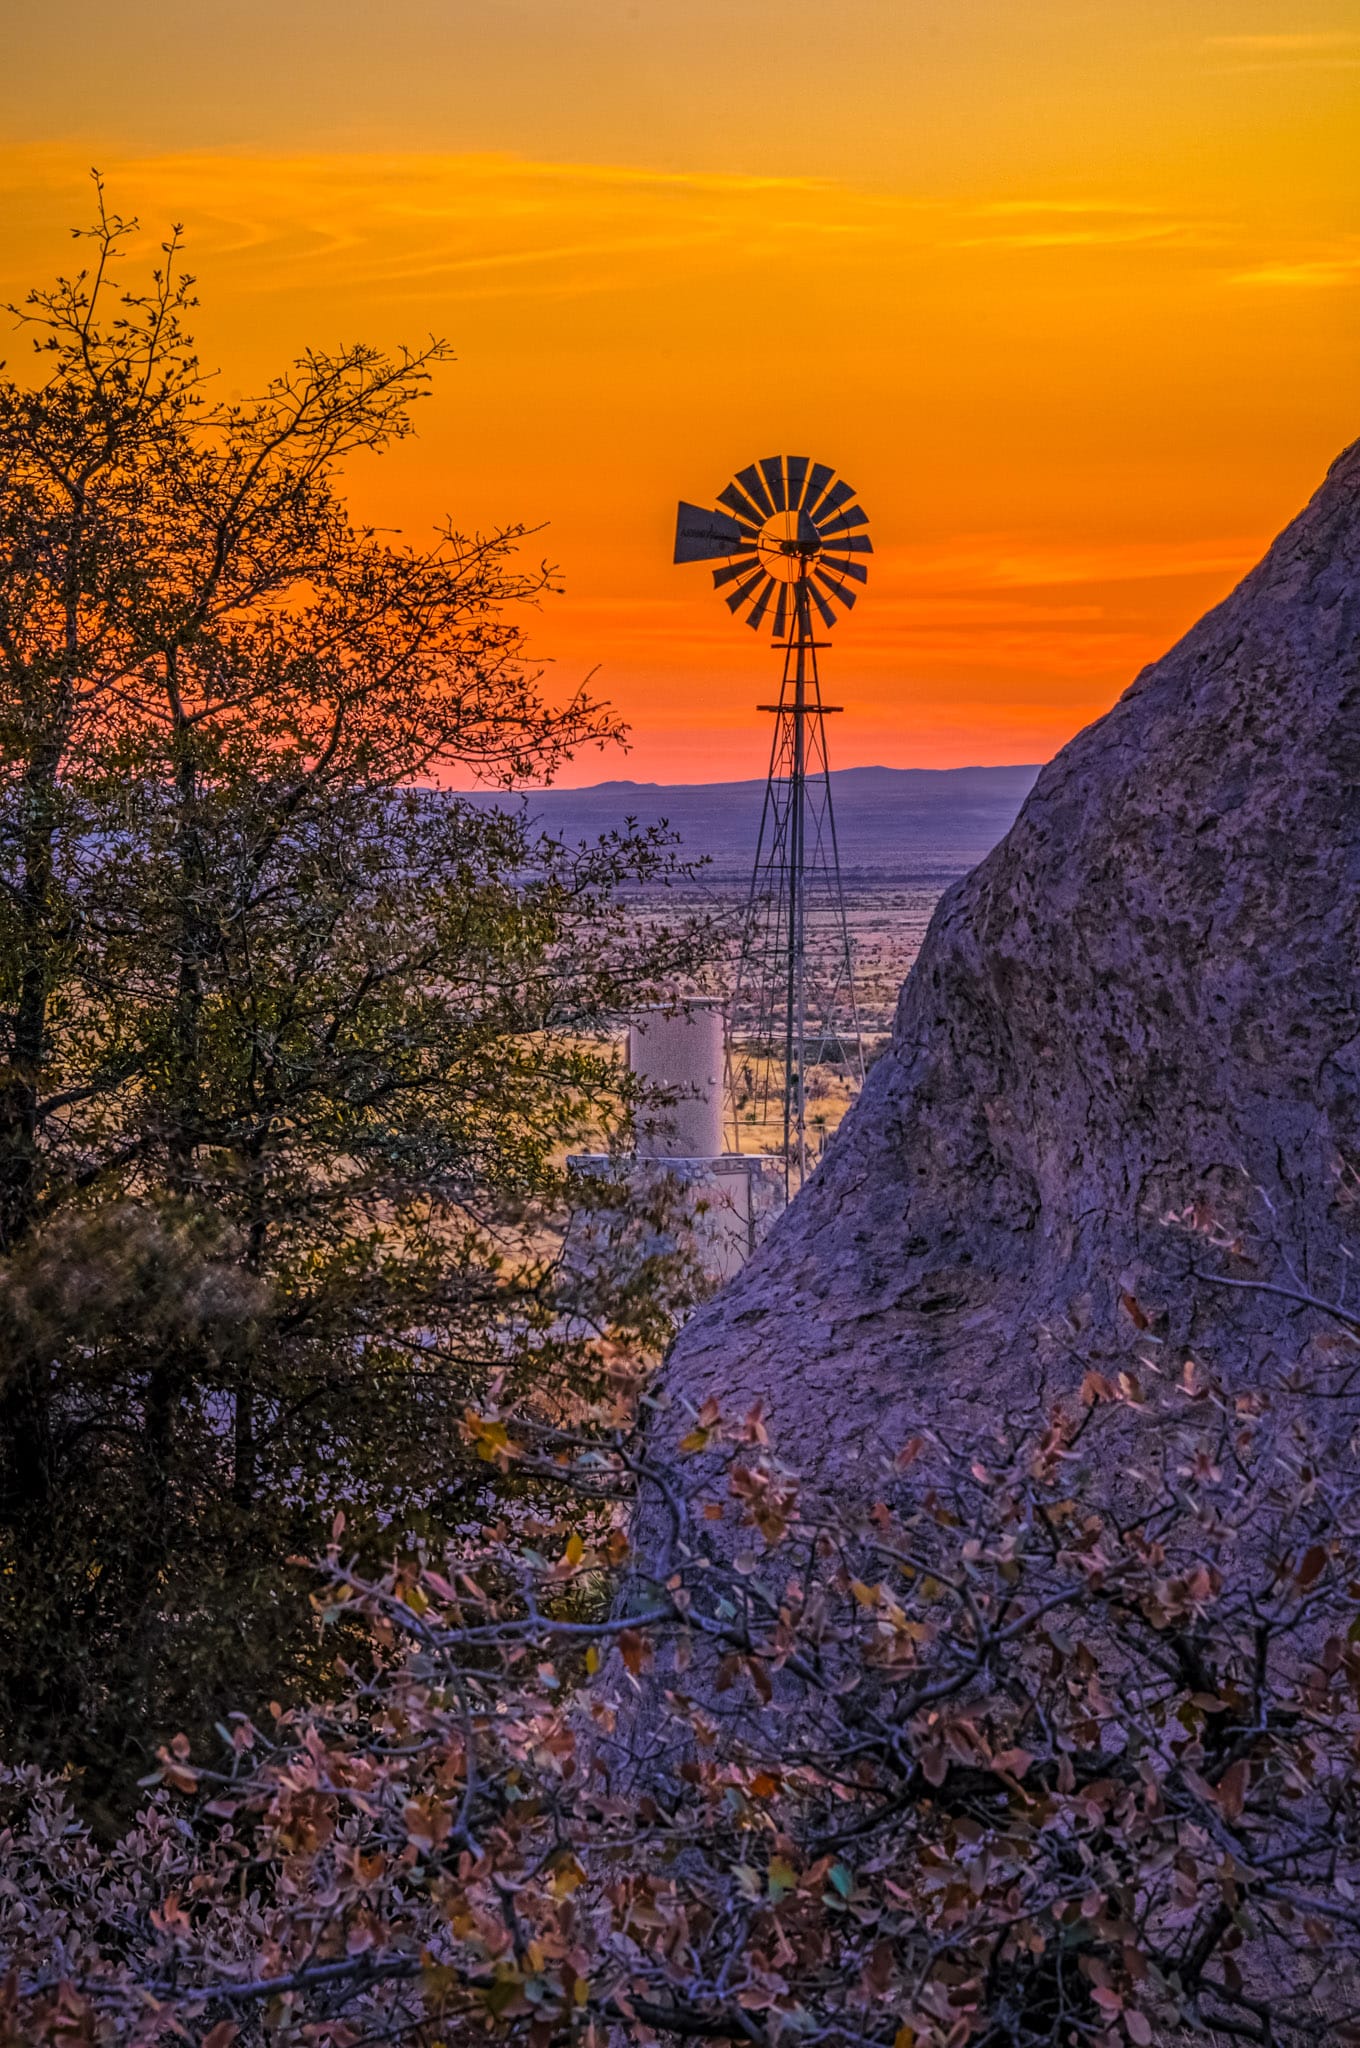 A windmill and water tank stand on the edge of City of Rocks at sunset.